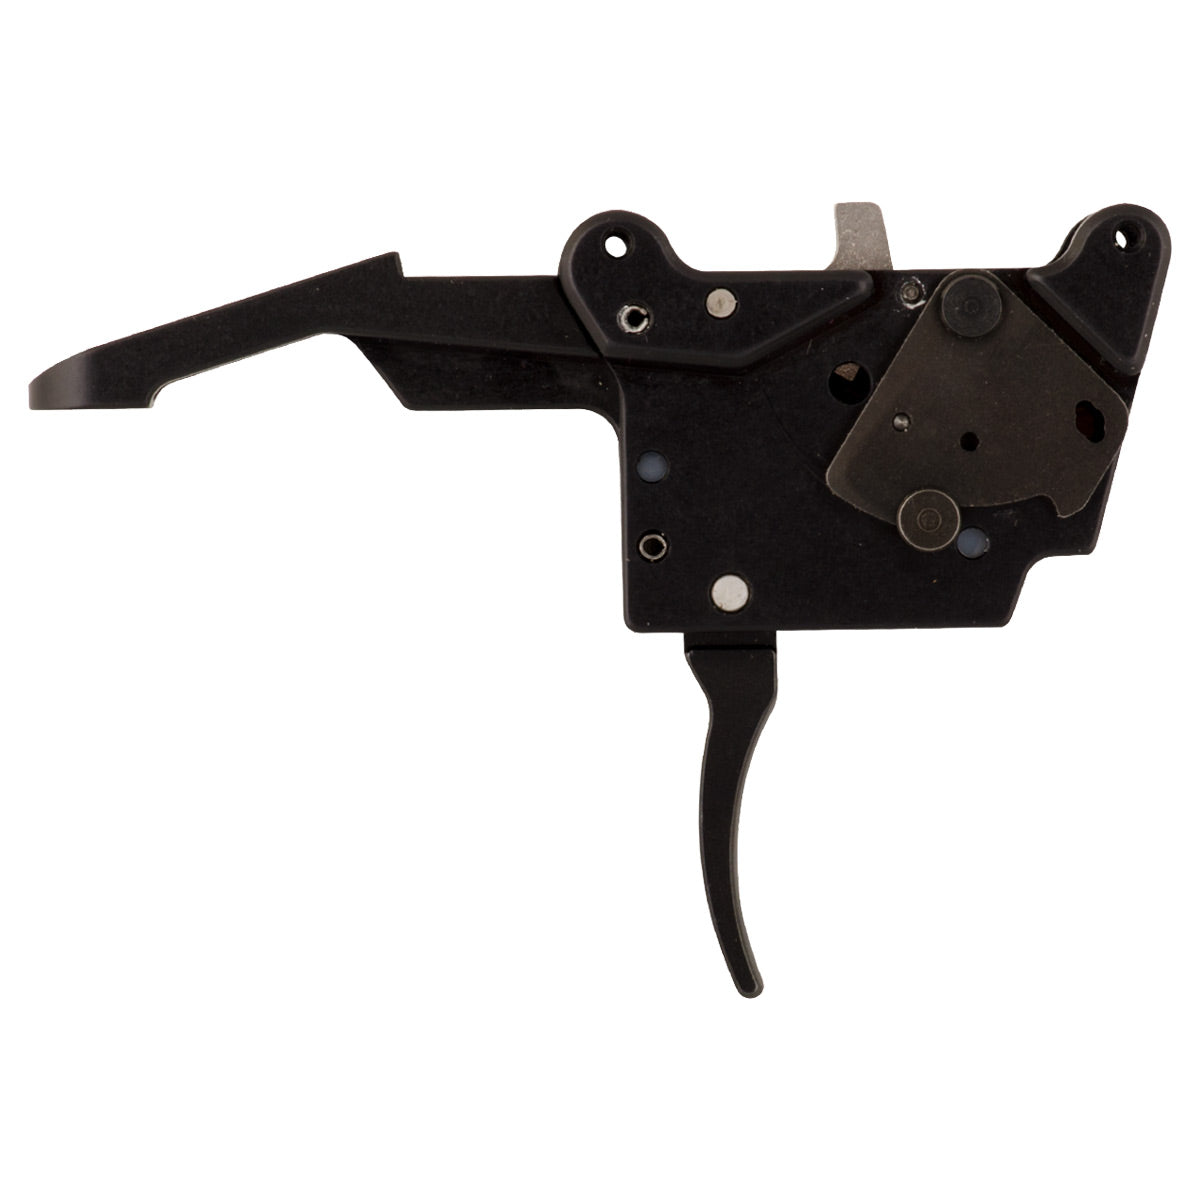 Timney Triggers Browning X-Bolt Trigger in  by GOHUNT | Timney Triggers - GOHUNT Shop